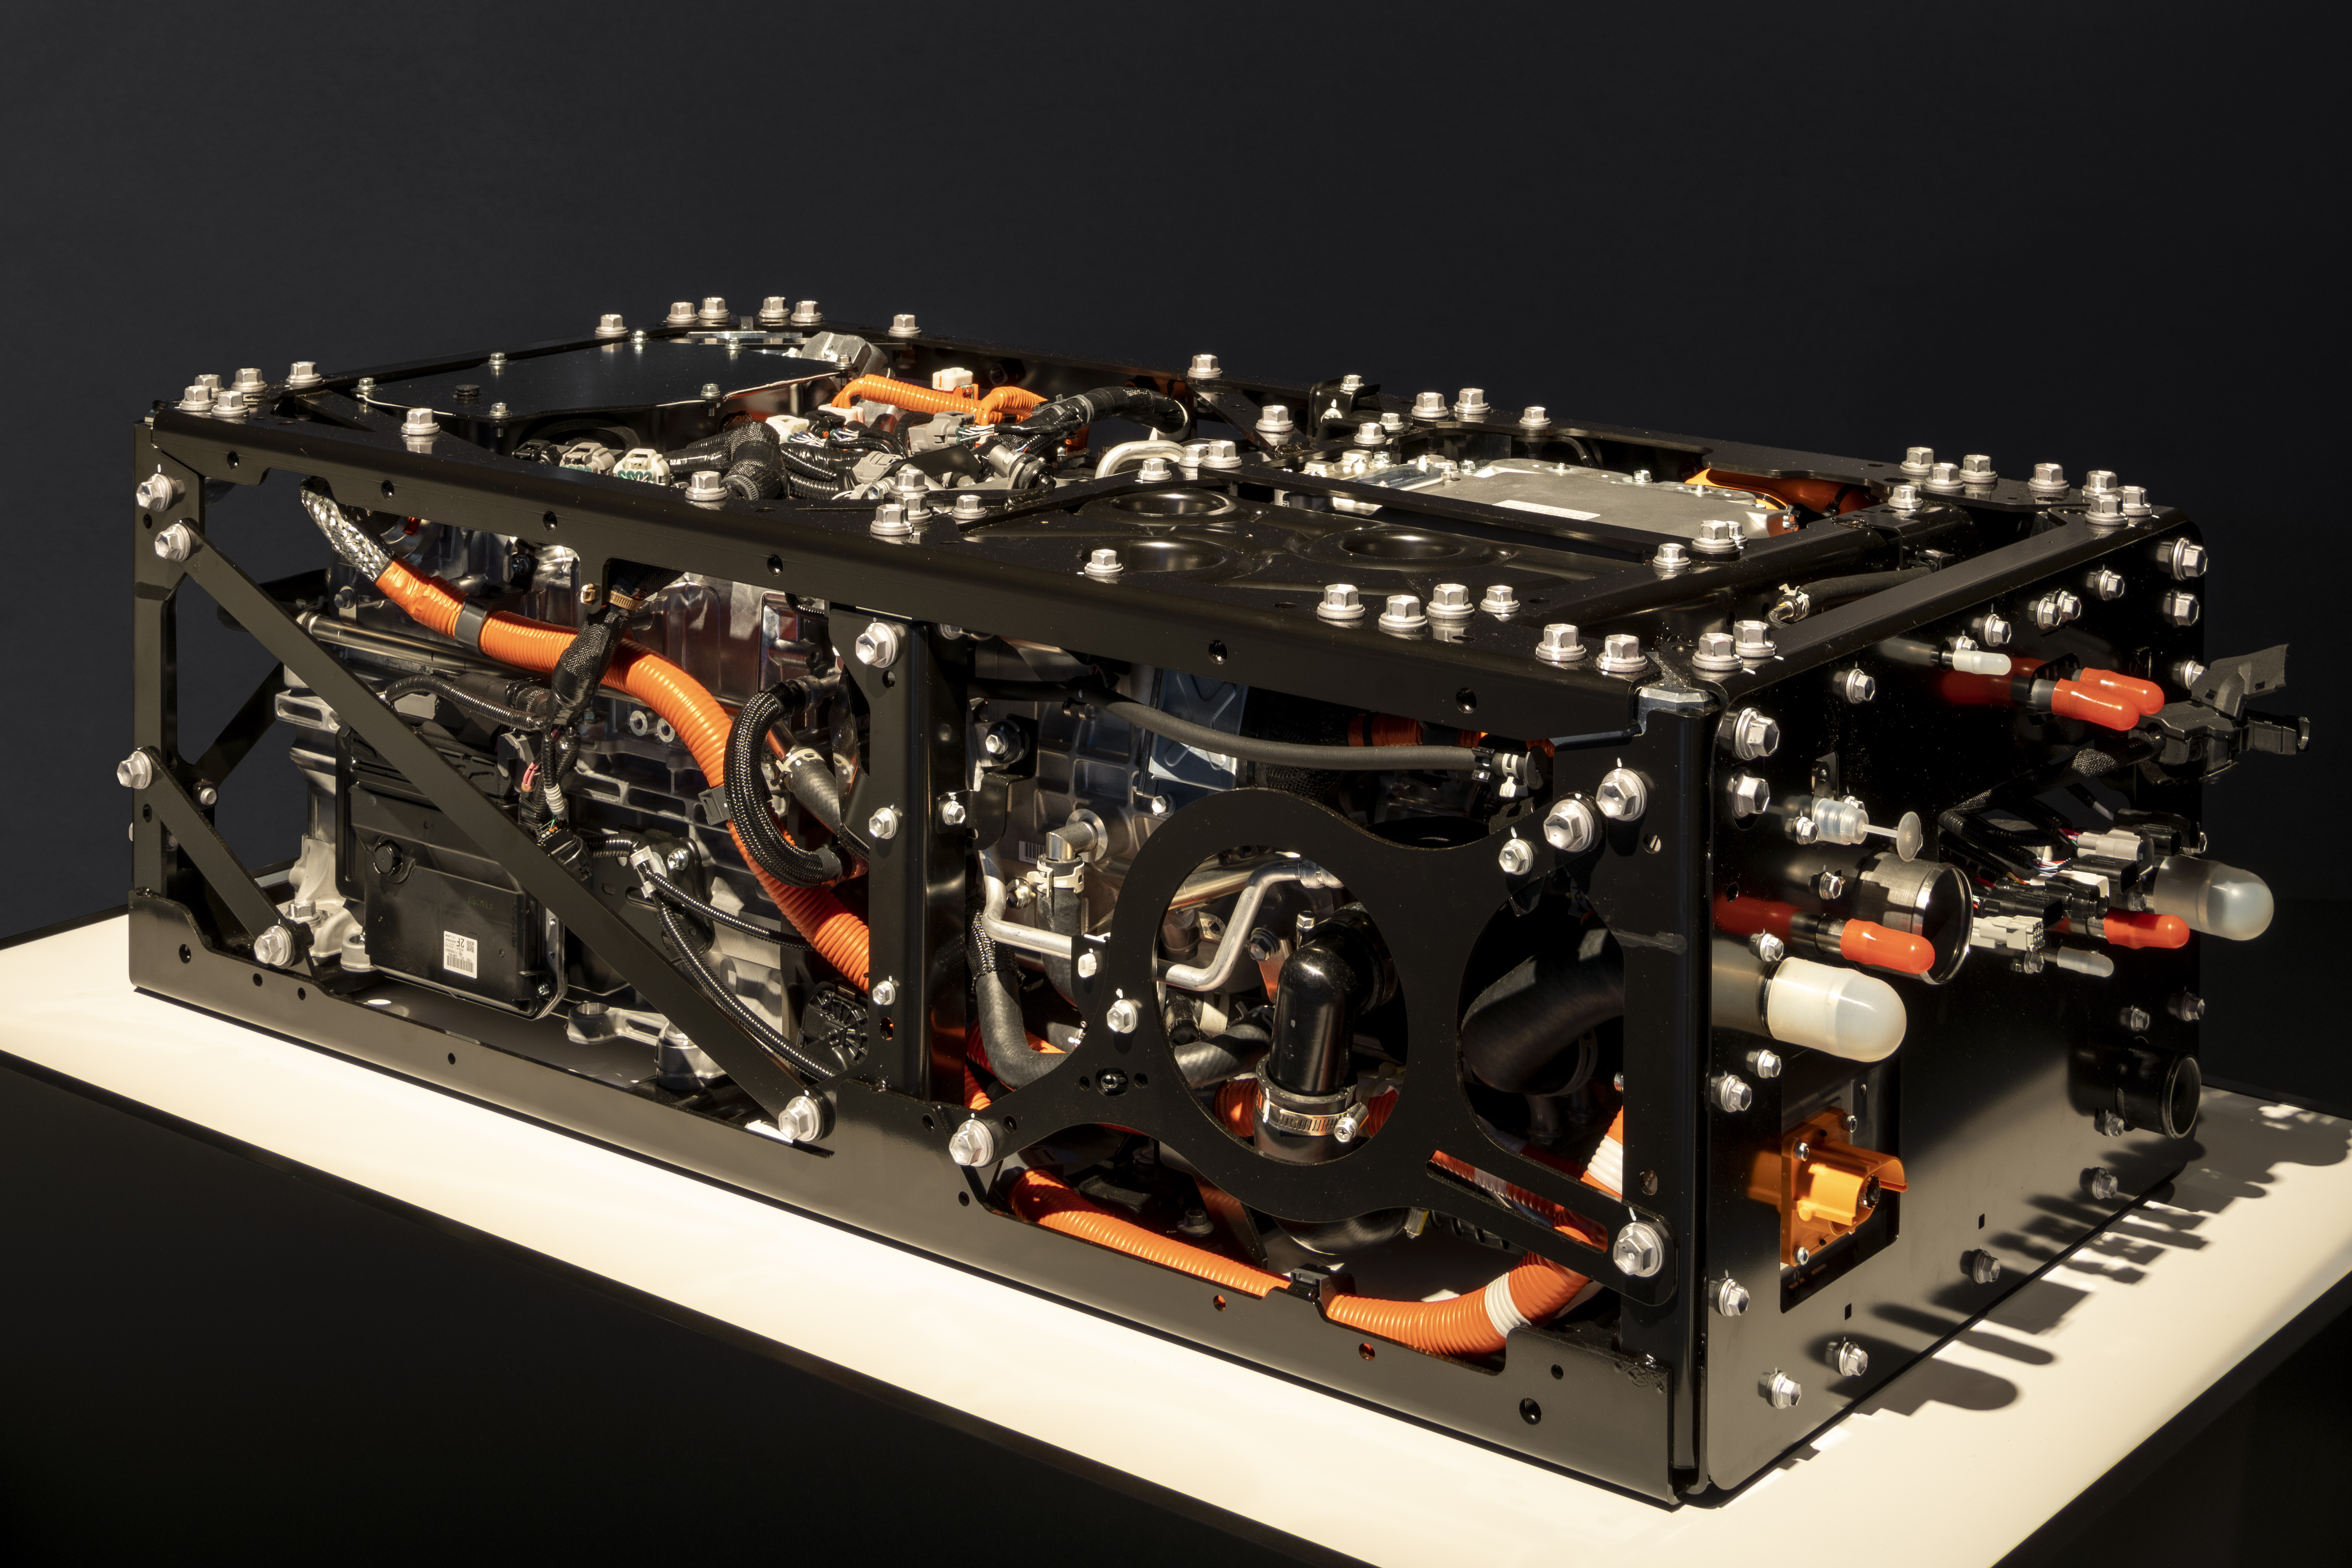 Toyota Motor Europe delivers 6 fuel cell modules for FCH2Rail project